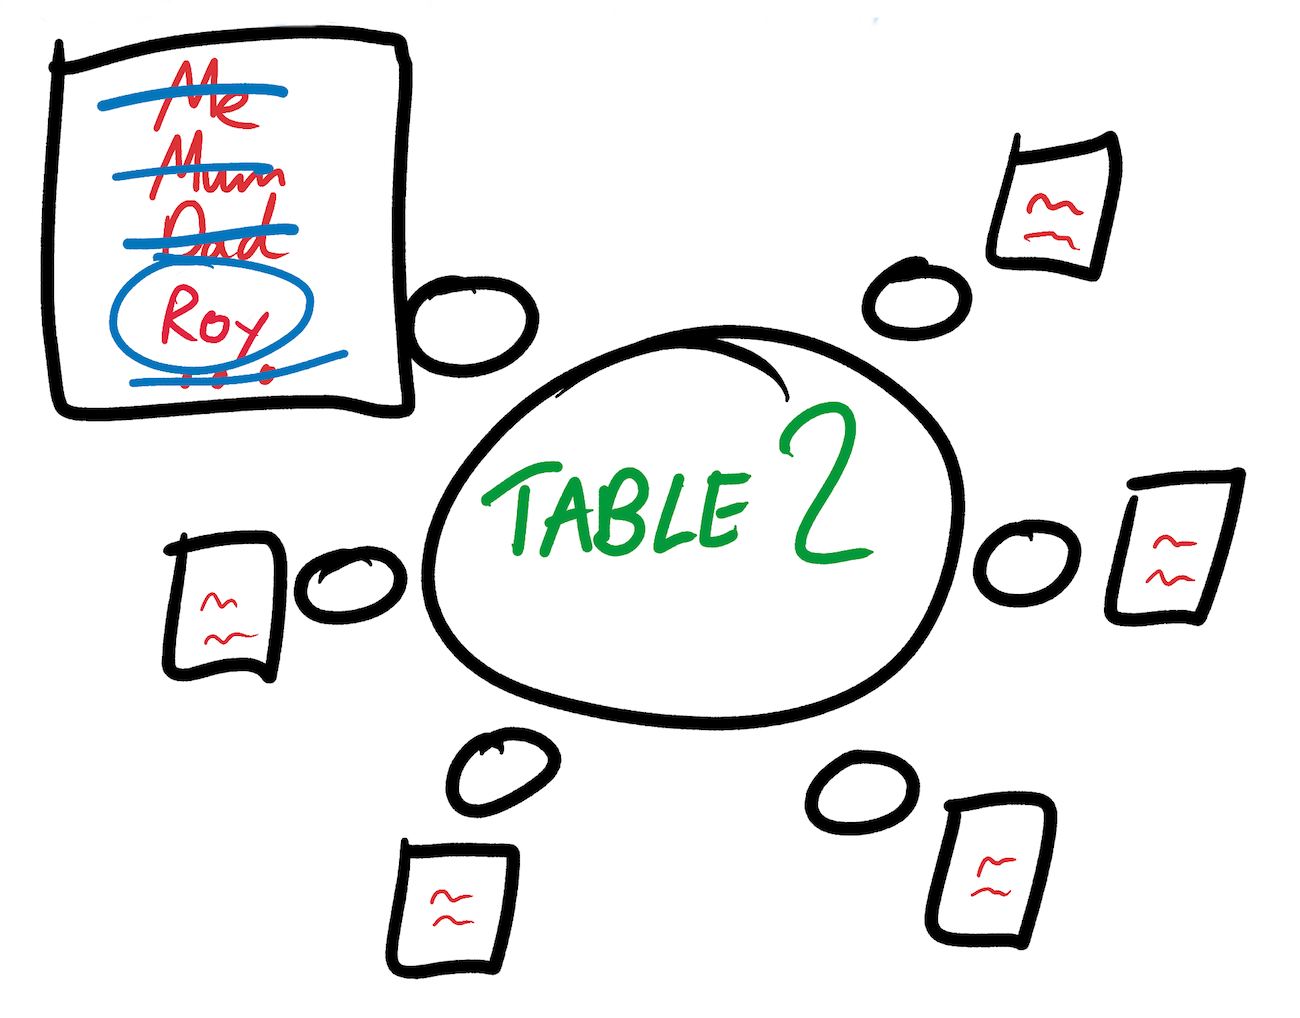 wfc-table-collapsed.png